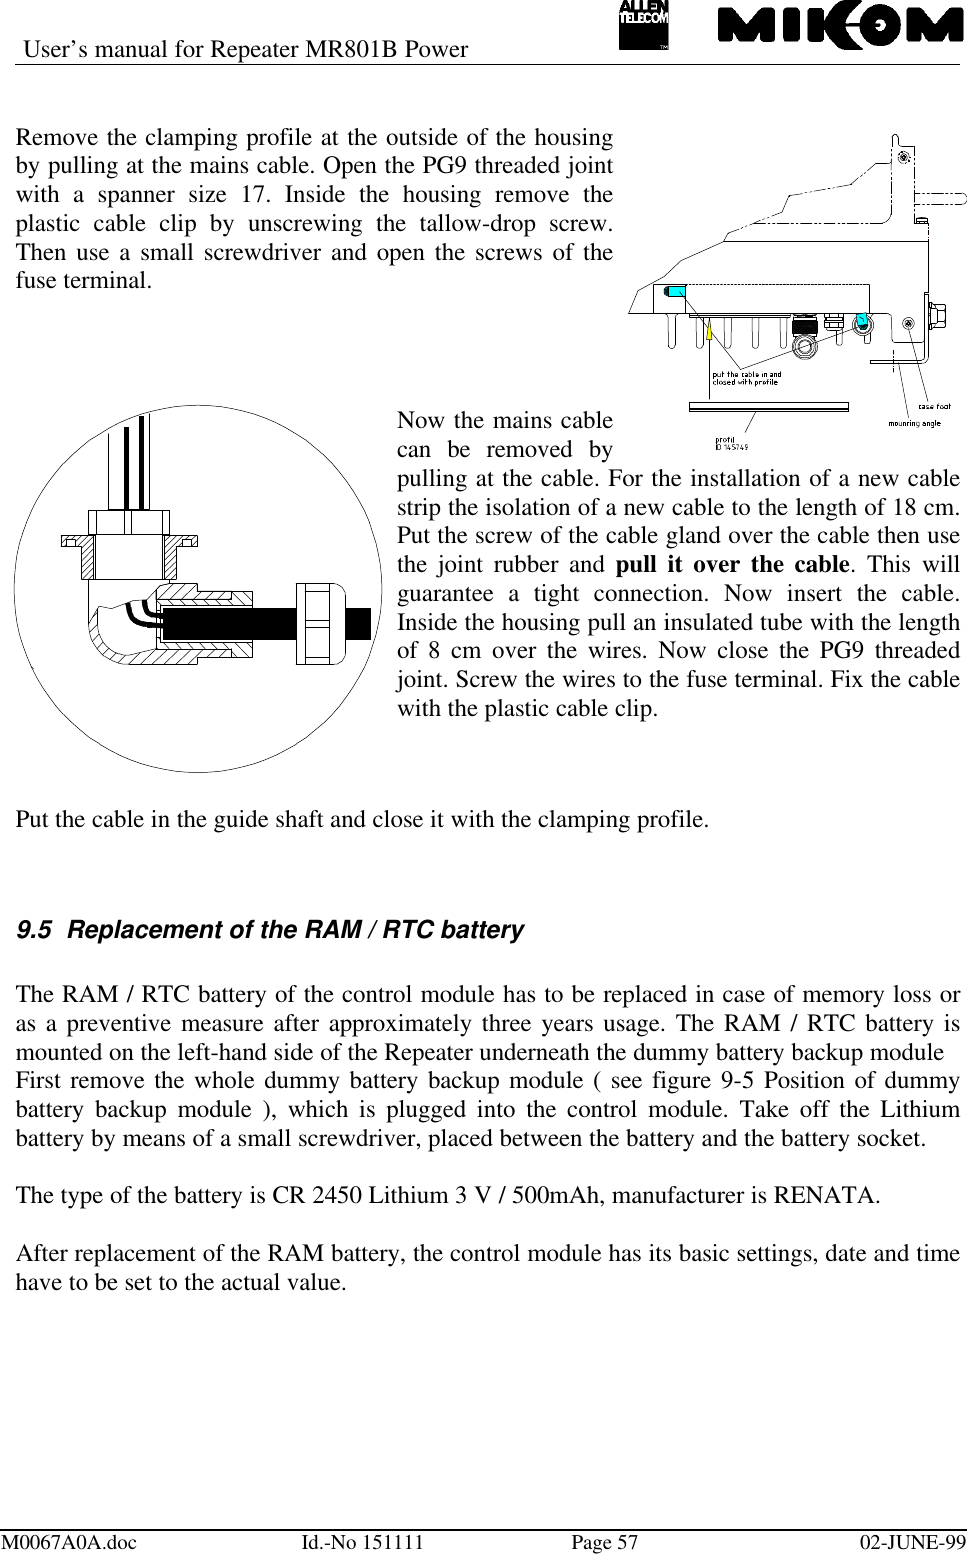 User’s manual for Repeater MR801B PowerM0067A0A.doc Id.-No 151111 Page 57 02-JUNE-99Remove the clamping profile at the outside of the housingby pulling at the mains cable. Open the PG9 threaded jointwith a spanner size 17. Inside the housing remove theplastic cable clip by unscrewing the tallow-drop screw.Then use a small screwdriver and open the screws of thefuse terminal.Now the mains cablecan be removed bypulling at the cable. For the installation of a new cablestrip the isolation of a new cable to the length of 18 cm.Put the screw of the cable gland over the cable then usethe joint rubber and pull it over the cable. This willguarantee a tight connection. Now insert the cable.Inside the housing pull an insulated tube with the lengthof 8 cm over the wires. Now close the PG9 threadedjoint. Screw the wires to the fuse terminal. Fix the cablewith the plastic cable clip.Put the cable in the guide shaft and close it with the clamping profile.9.5 Replacement of the RAM / RTC batteryThe RAM / RTC battery of the control module has to be replaced in case of memory loss oras a preventive measure after approximately three years usage. The RAM / RTC battery ismounted on the left-hand side of the Repeater underneath the dummy battery backup moduleFirst remove the whole dummy battery backup module ( see figure 9-5 Position of dummybattery backup module ), which is plugged into the control module. Take off the Lithiumbattery by means of a small screwdriver, placed between the battery and the battery socket.The type of the battery is CR 2450 Lithium 3 V / 500mAh, manufacturer is RENATA.After replacement of the RAM battery, the control module has its basic settings, date and timehave to be set to the actual value.